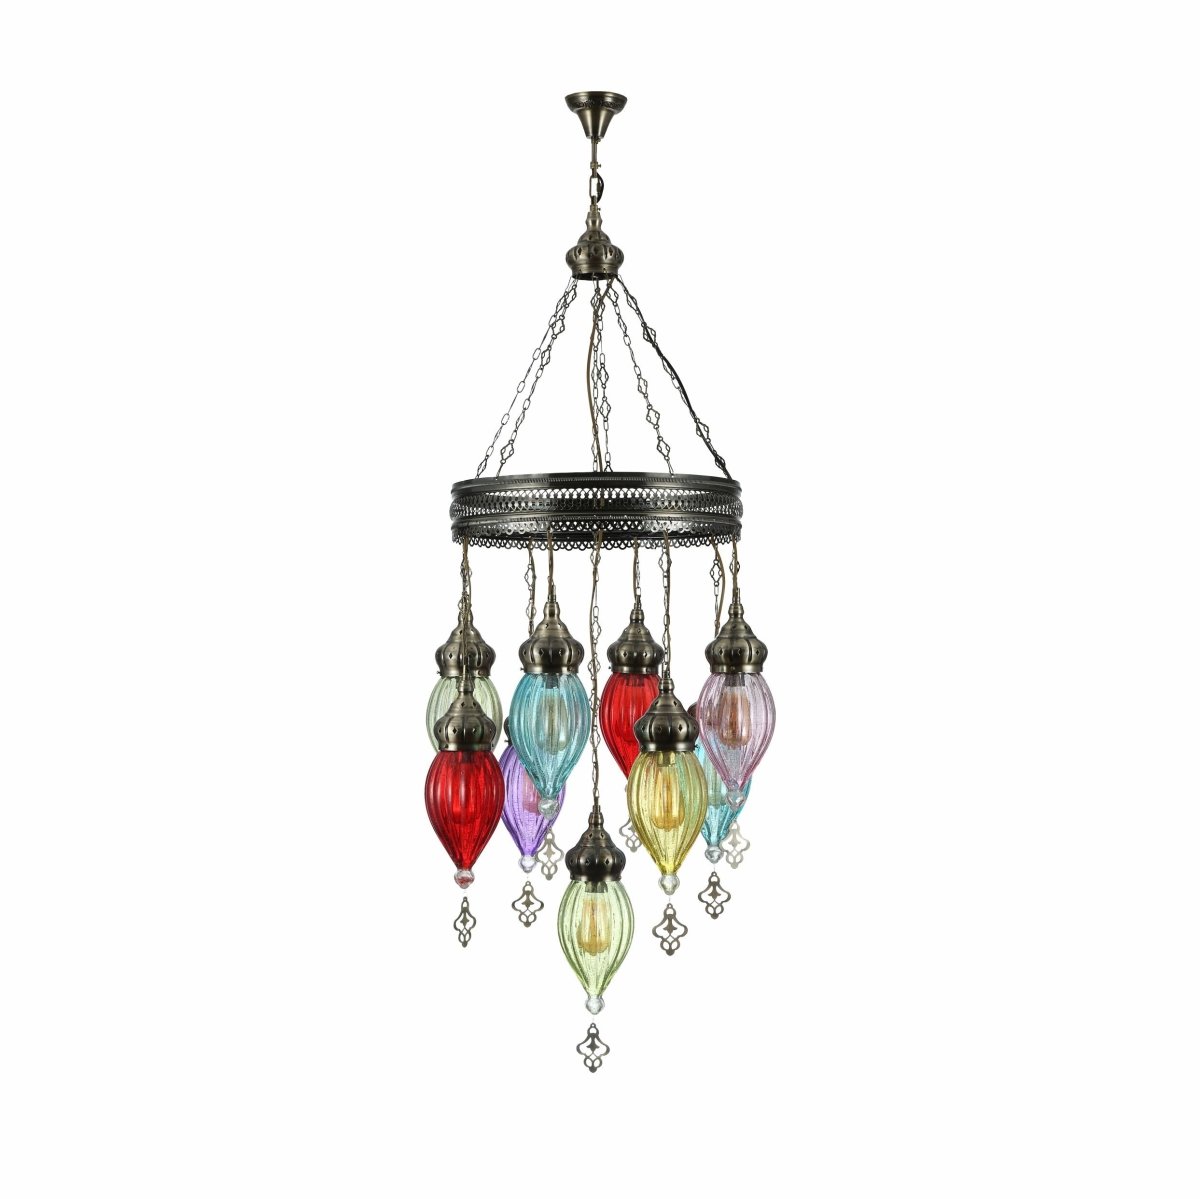 Main image of Moroccan Style Antique Brass and Multi Colour Glass Chandelier Pendant Light 9xE27 | TEKLED 158-19562